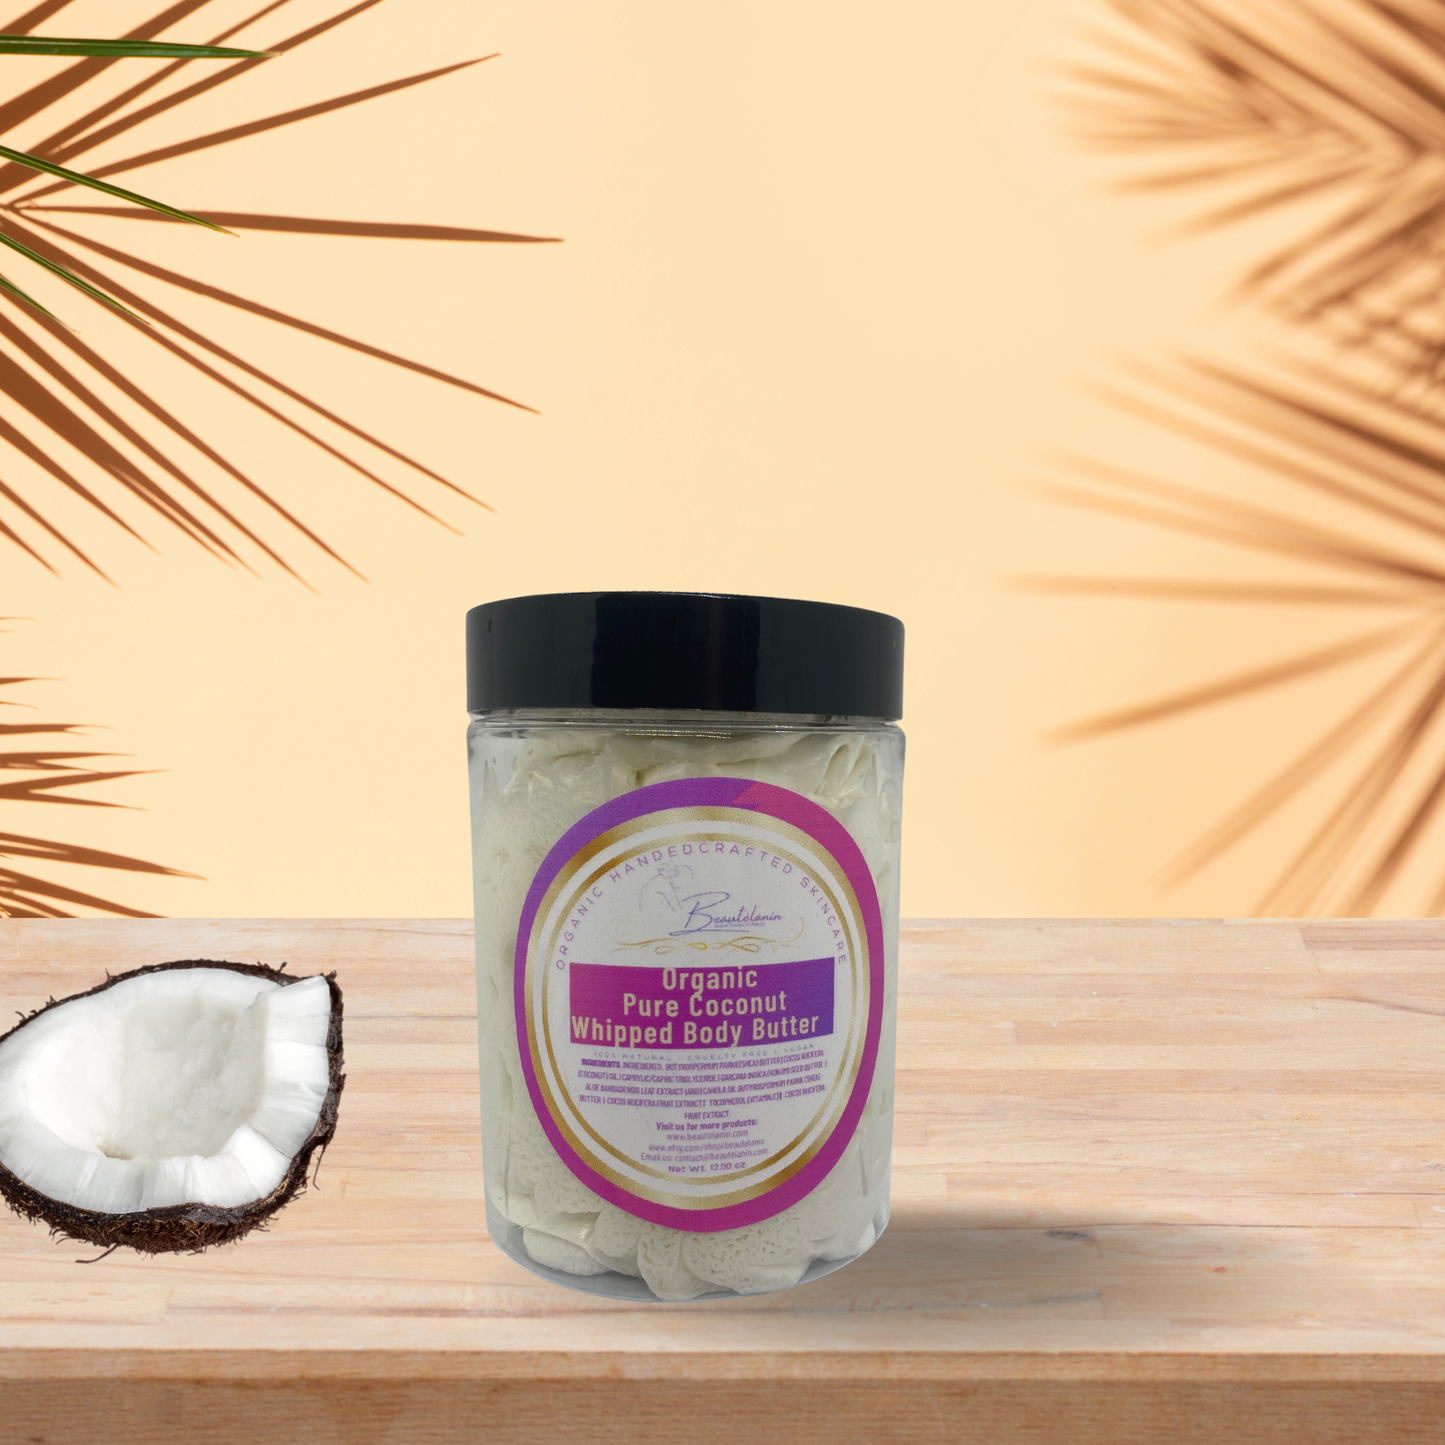 Organic Pure Coconut Whipped Body Butter